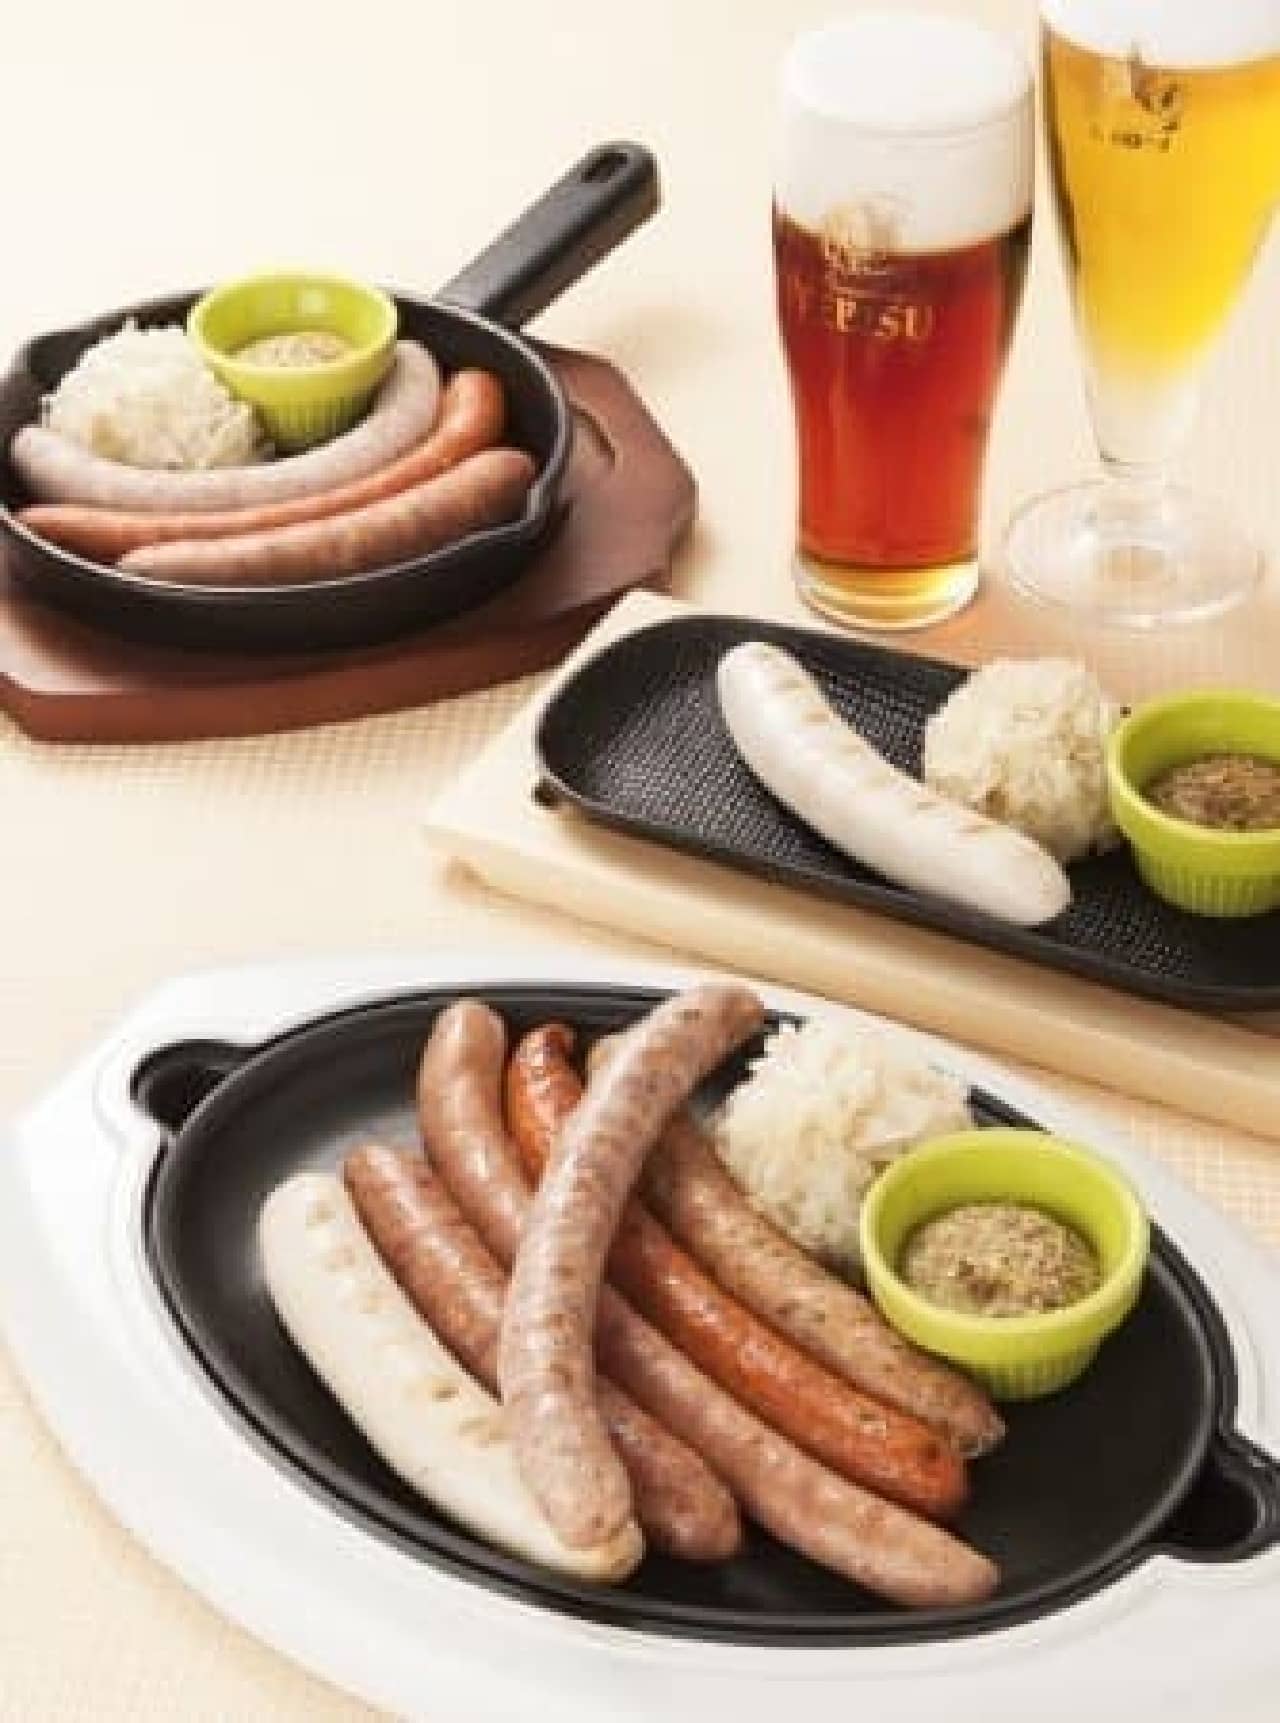 One sausage or assorted sausages! (The photo is an image)